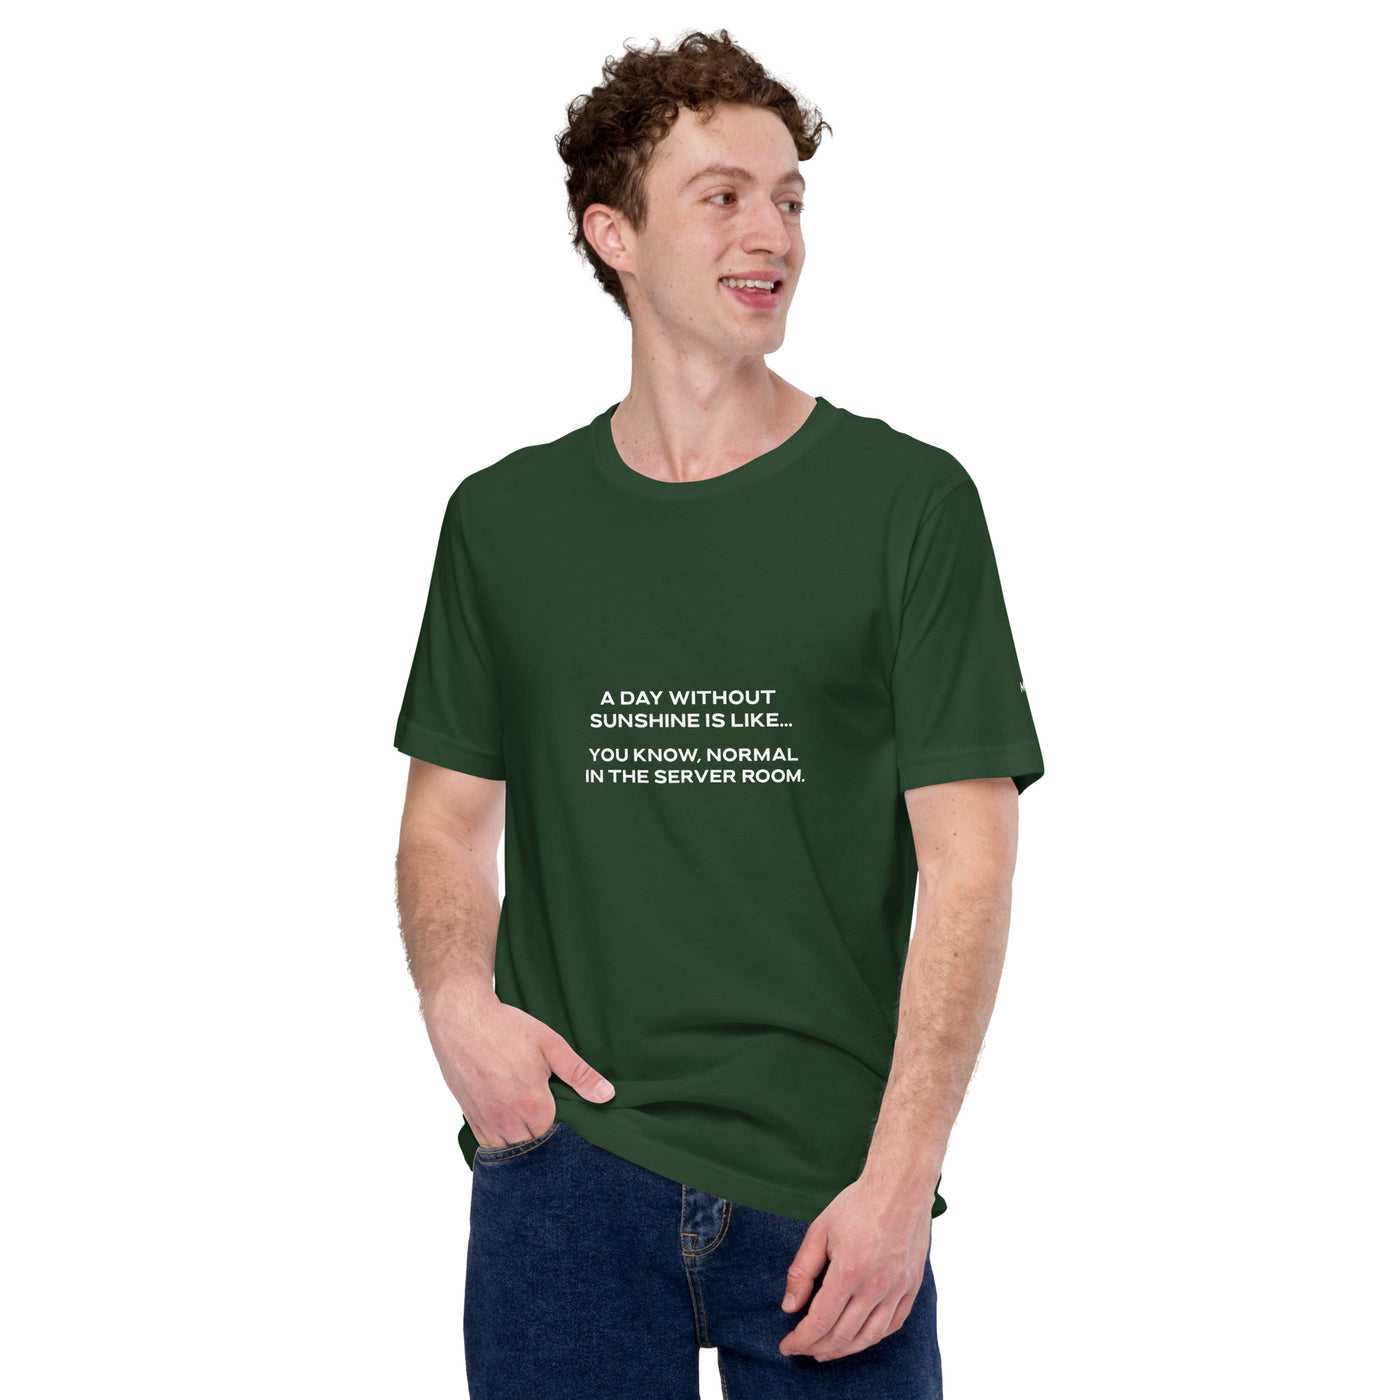 A day without sunshine is like you know, normal in the server room V1 - Unisex t-shirt